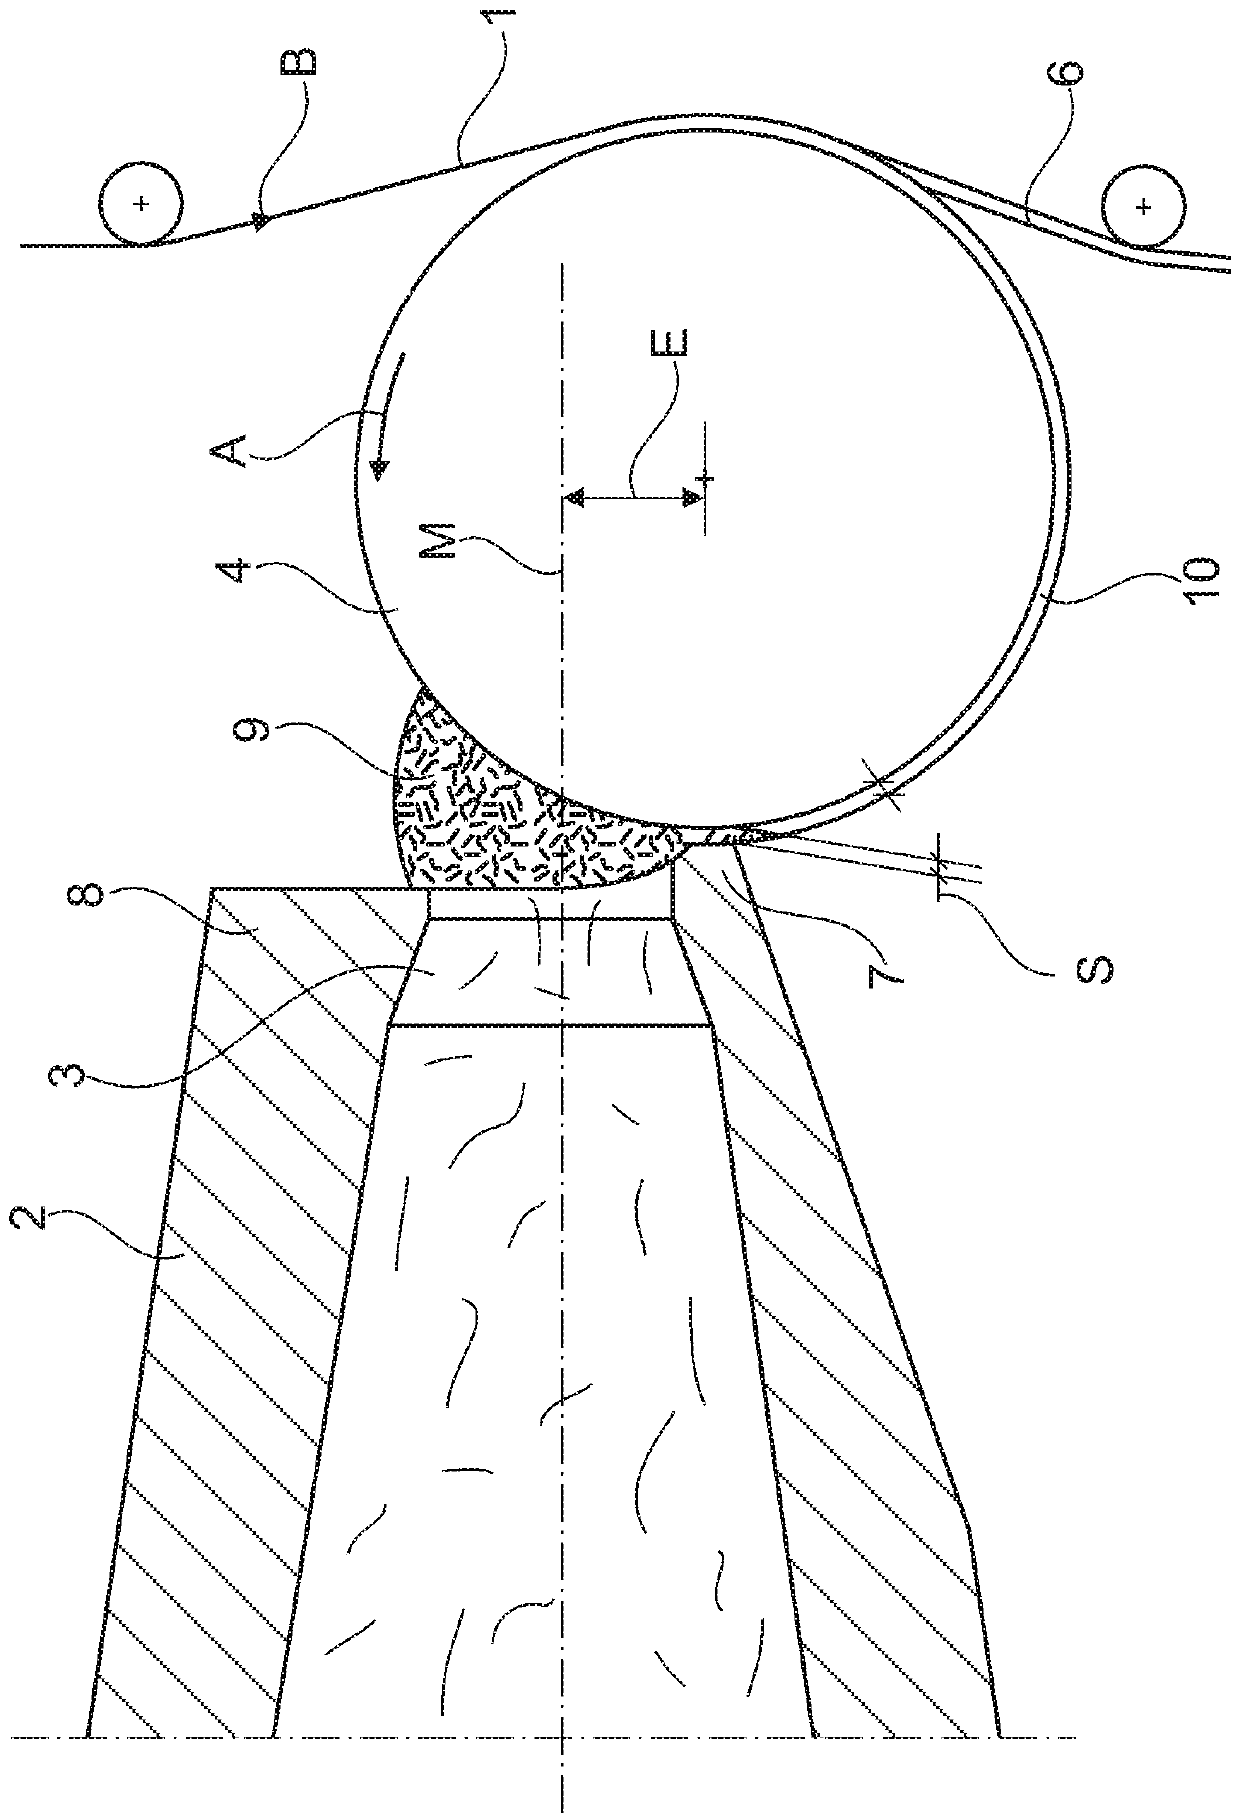 Apparatus for applying glue marks to wrapping strips of tobacco rod-shaped articles